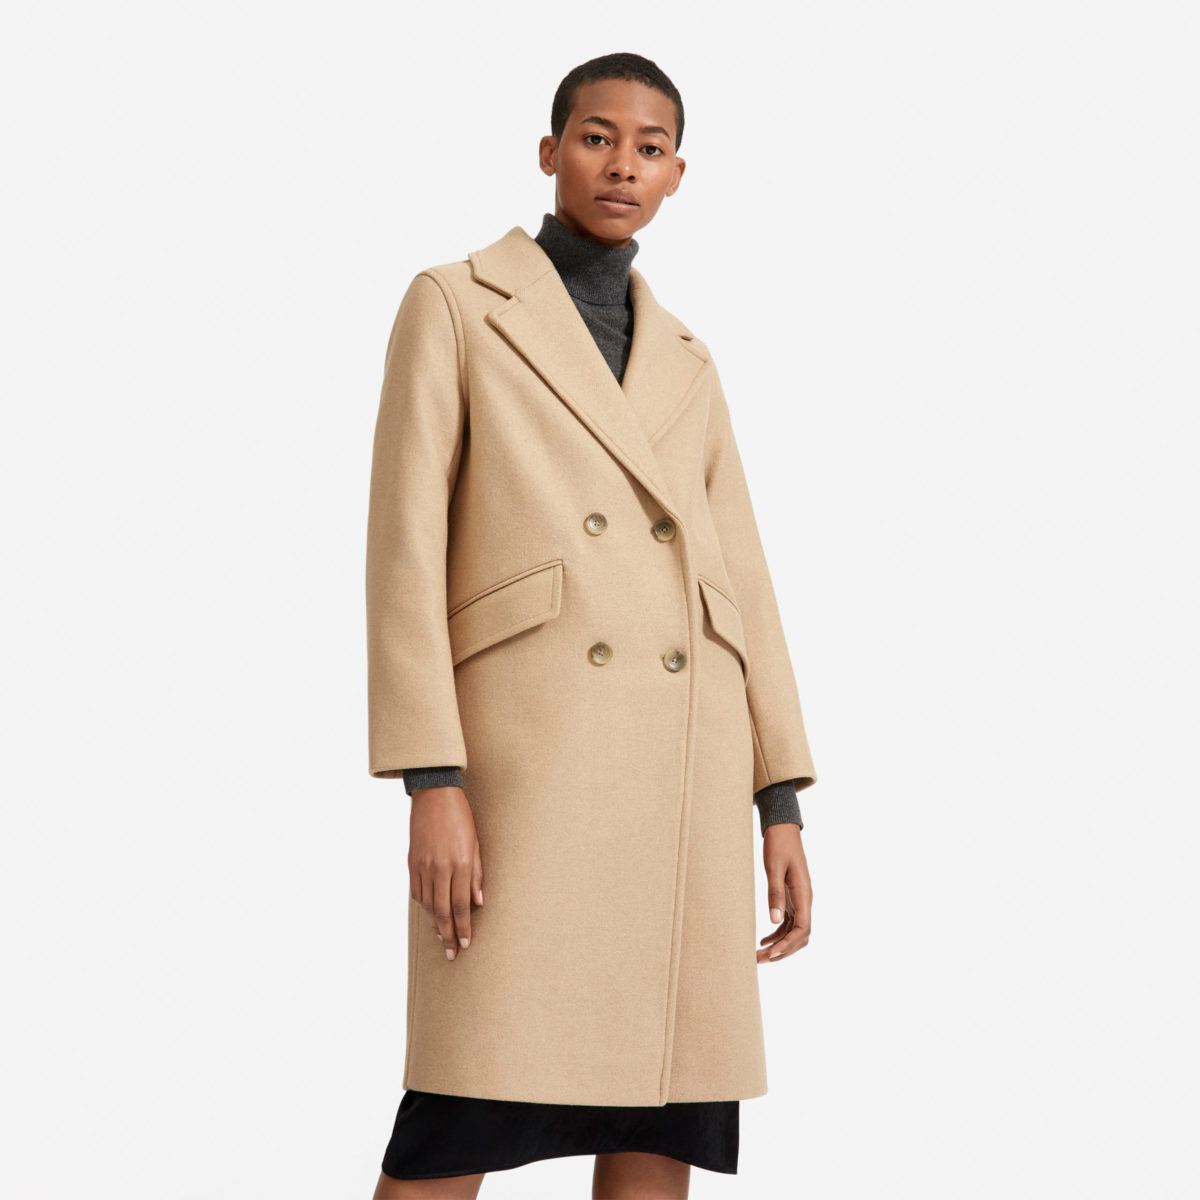 A beige trench coat